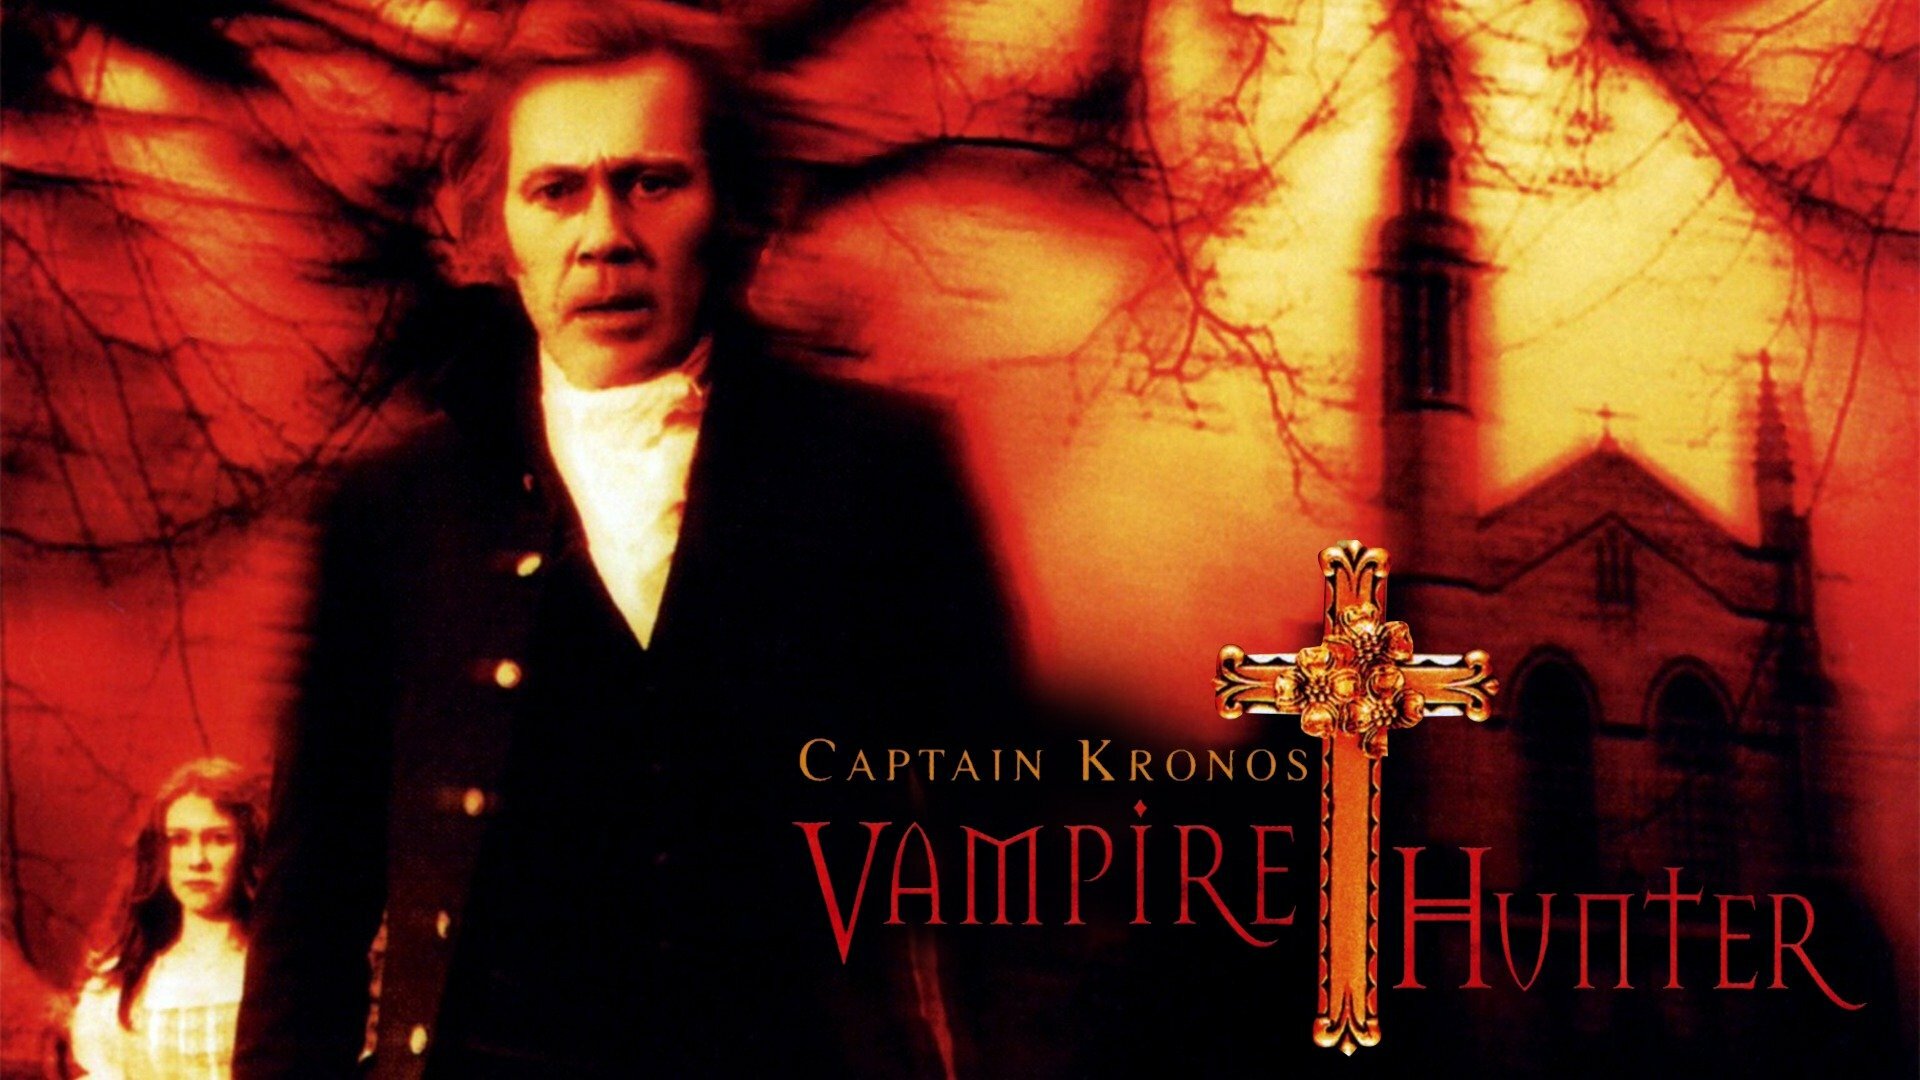 42-facts-about-the-movie-captain-kronos-vampire-hunter